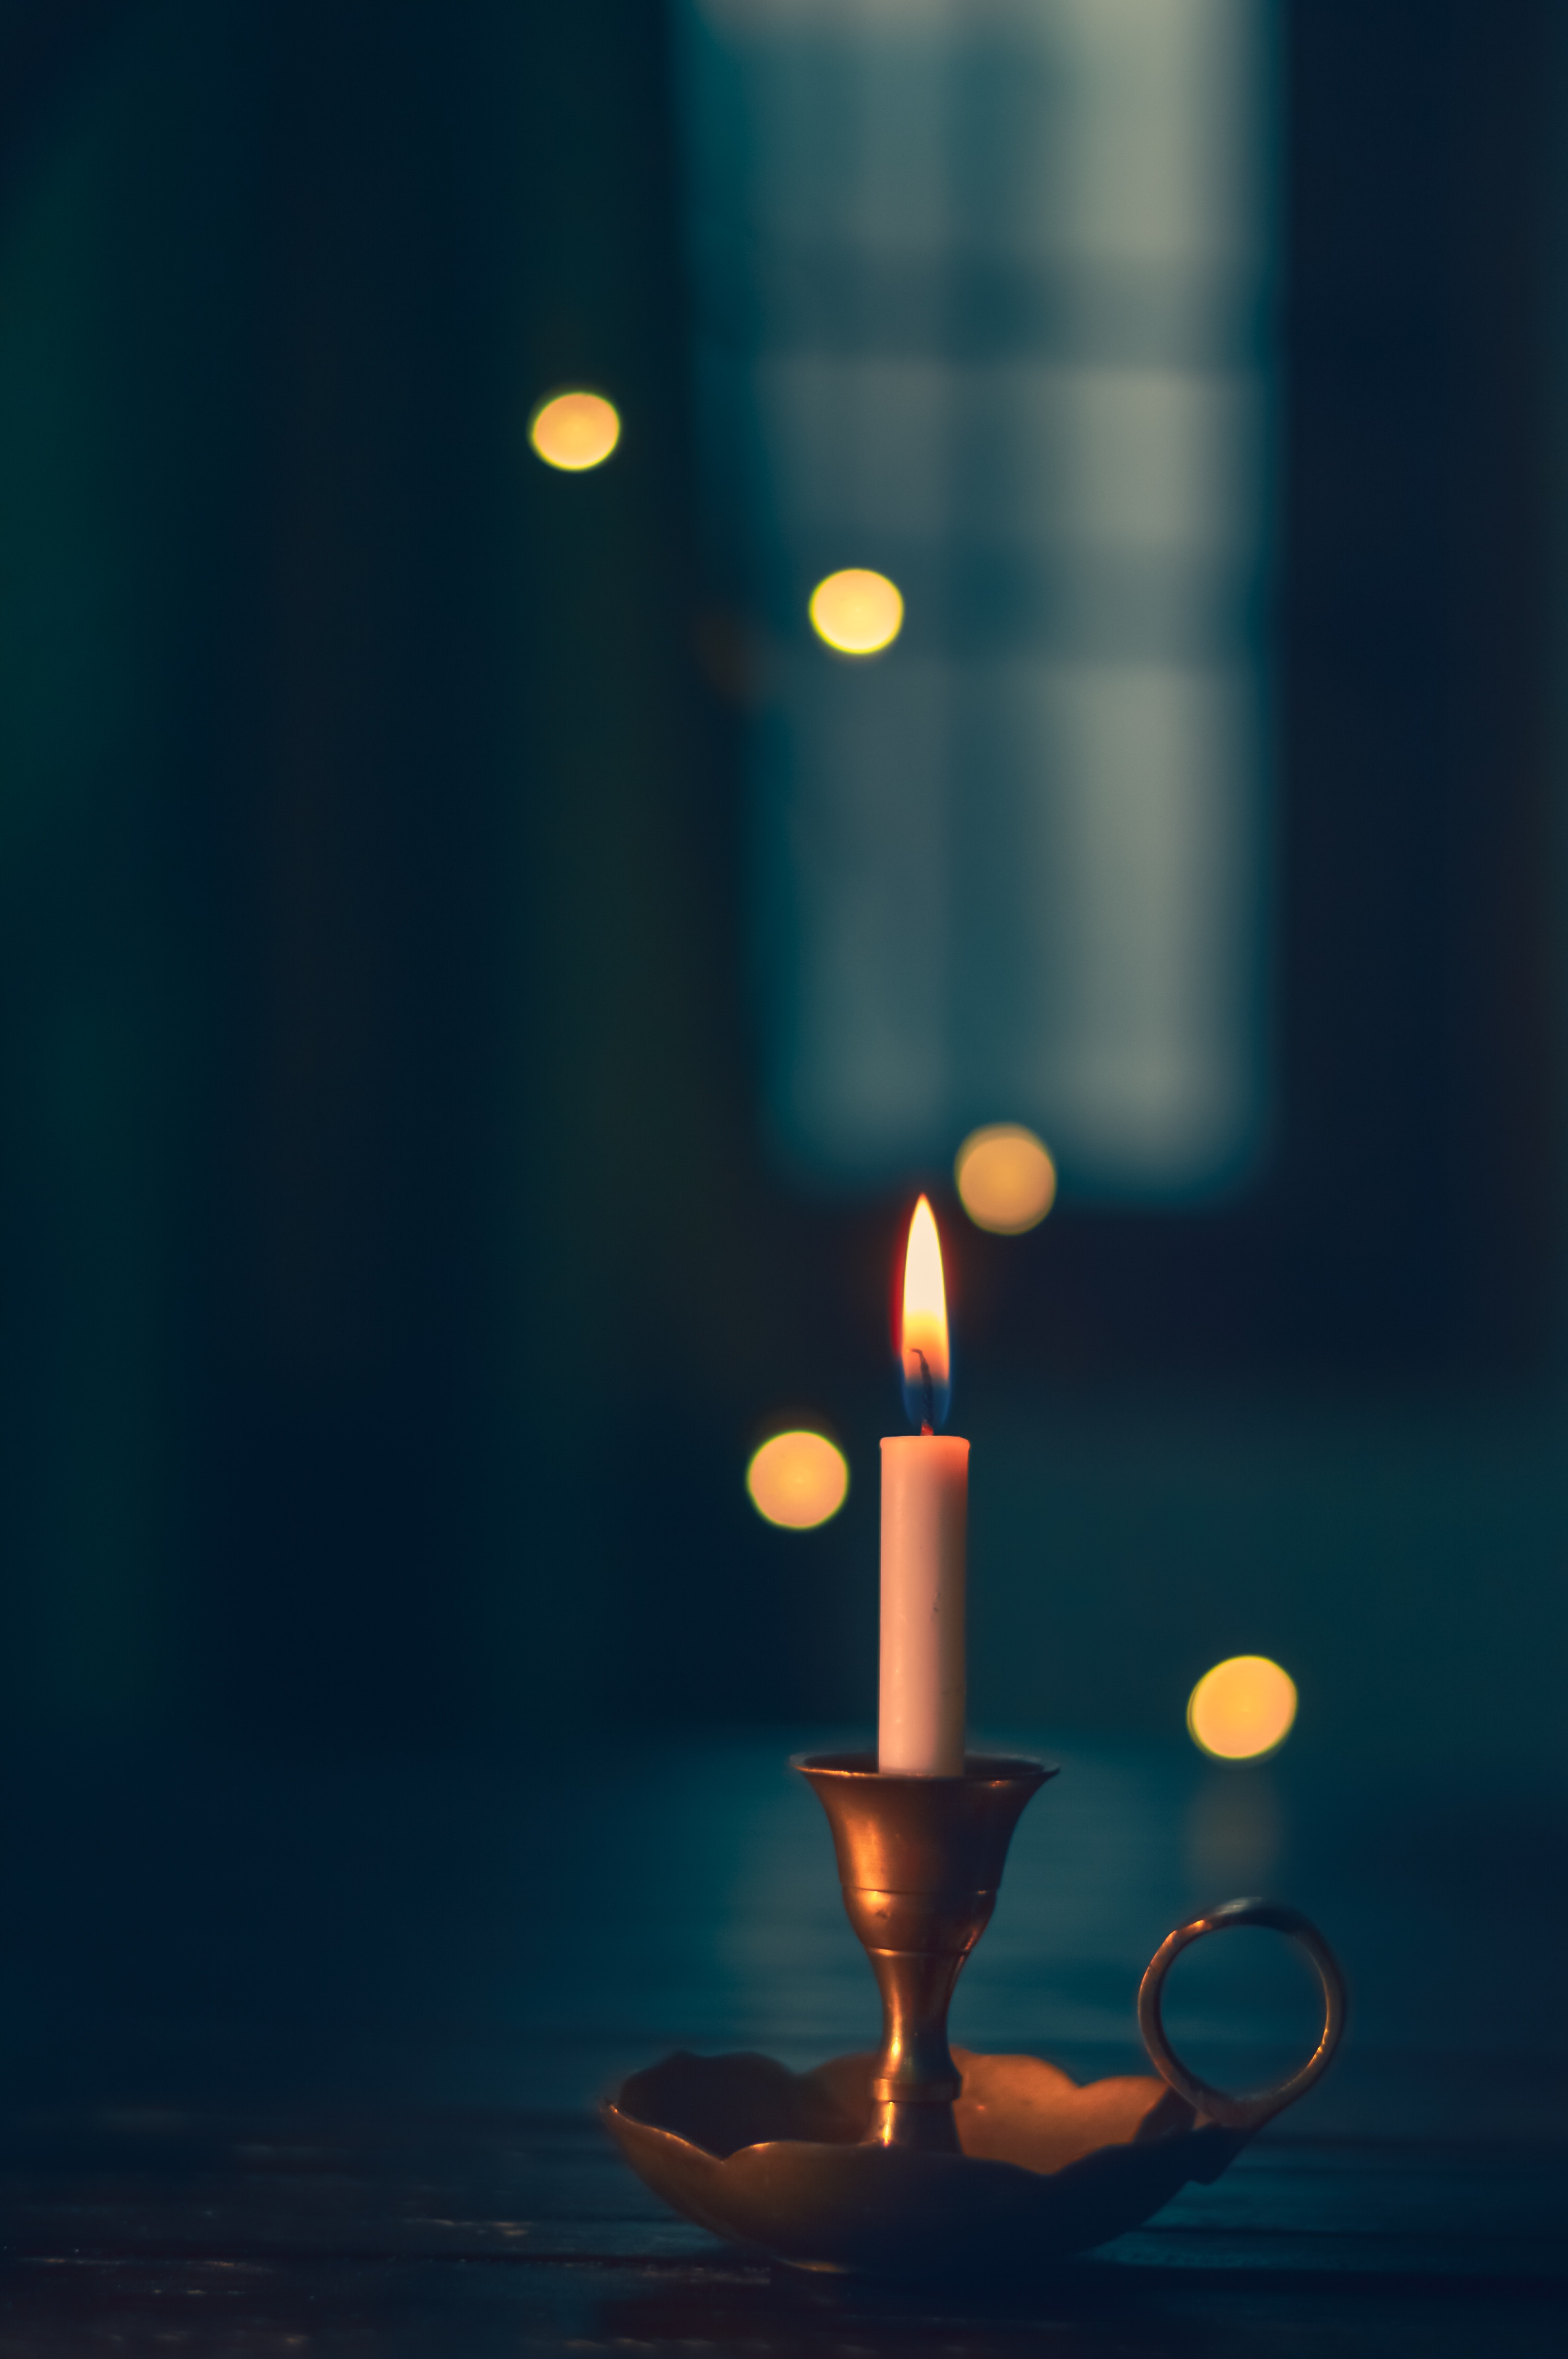 candle, fire, miscellanea, miscellaneous, blur, smooth, wick, wax, candlestick wallpaper for mobile